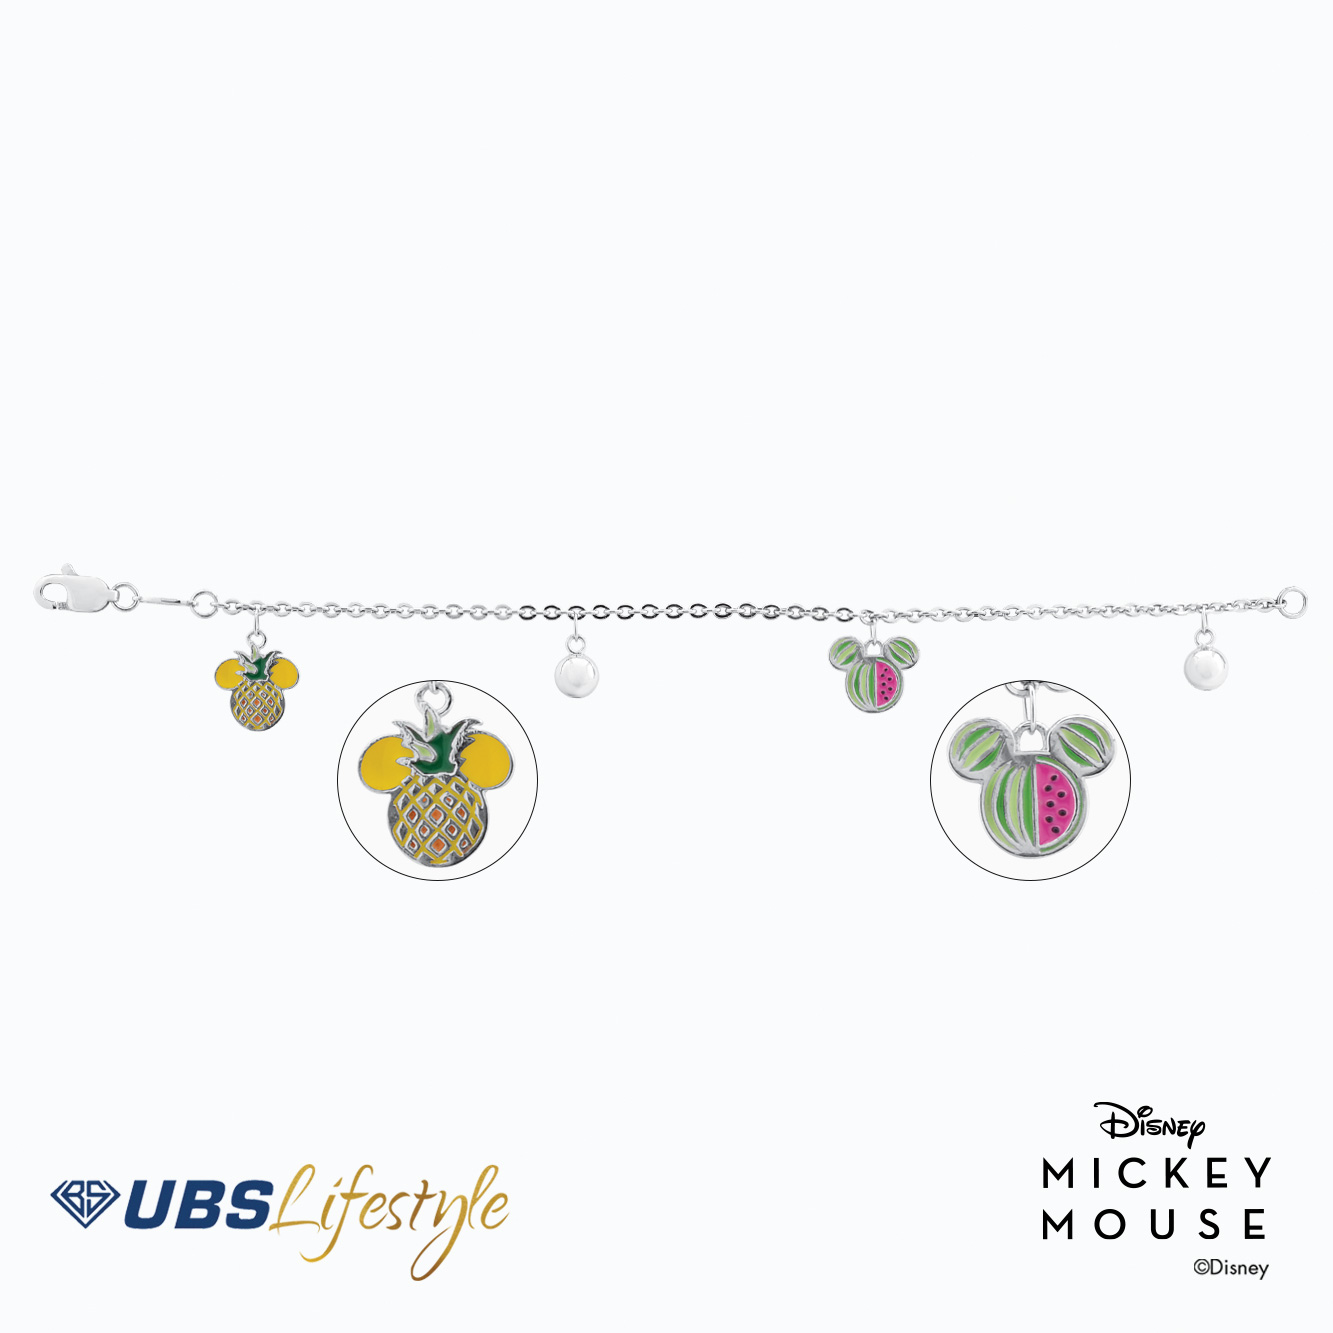 UBS Gelang Emas Anak Disney Mickey Mouse - Hgy0085 - 17K